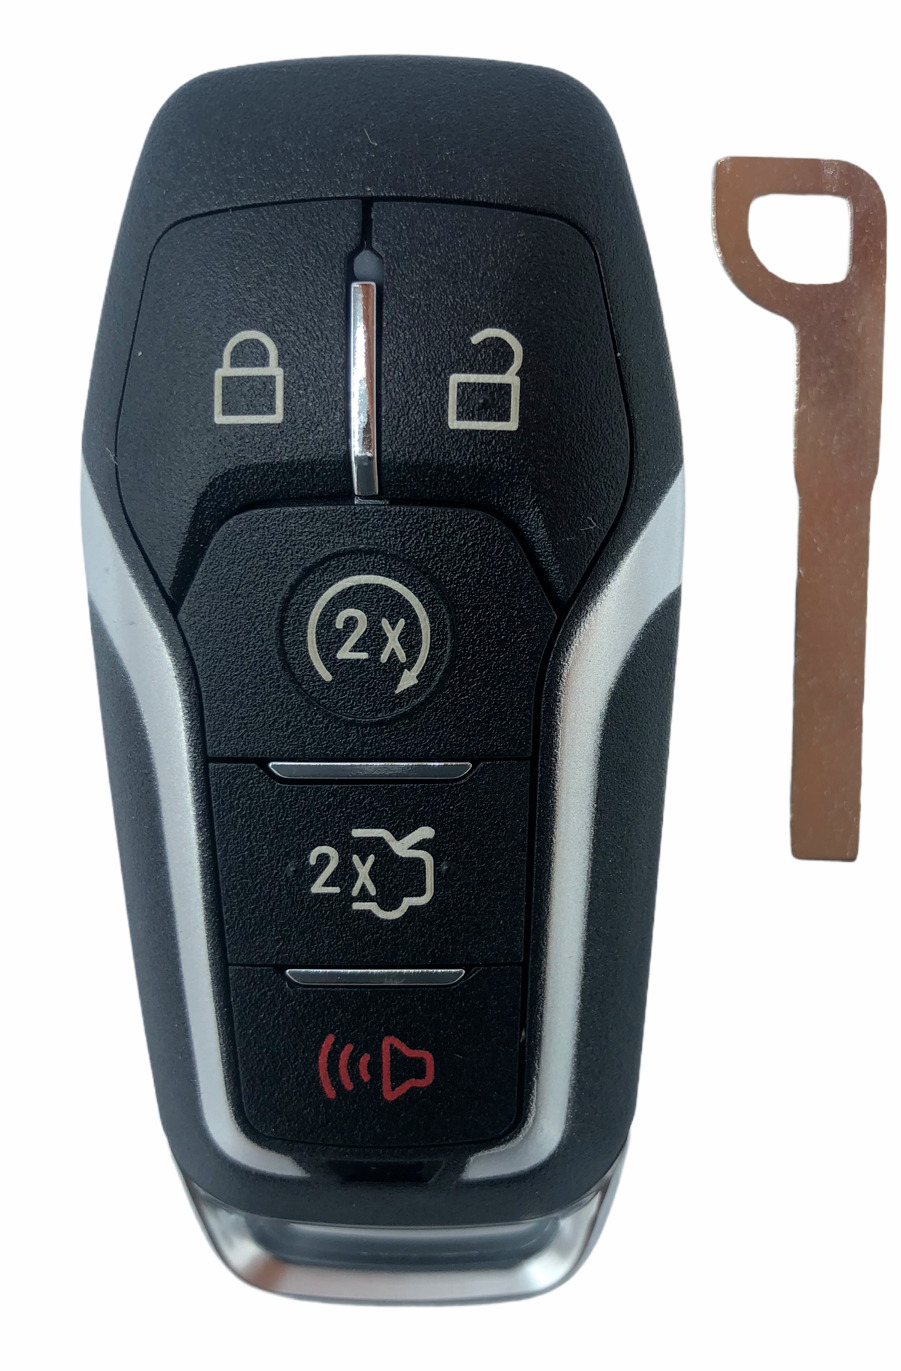 For 2015 2016 2017 Ford Mustang Smart Prox Remote Key Fob M3N-A2C31243300